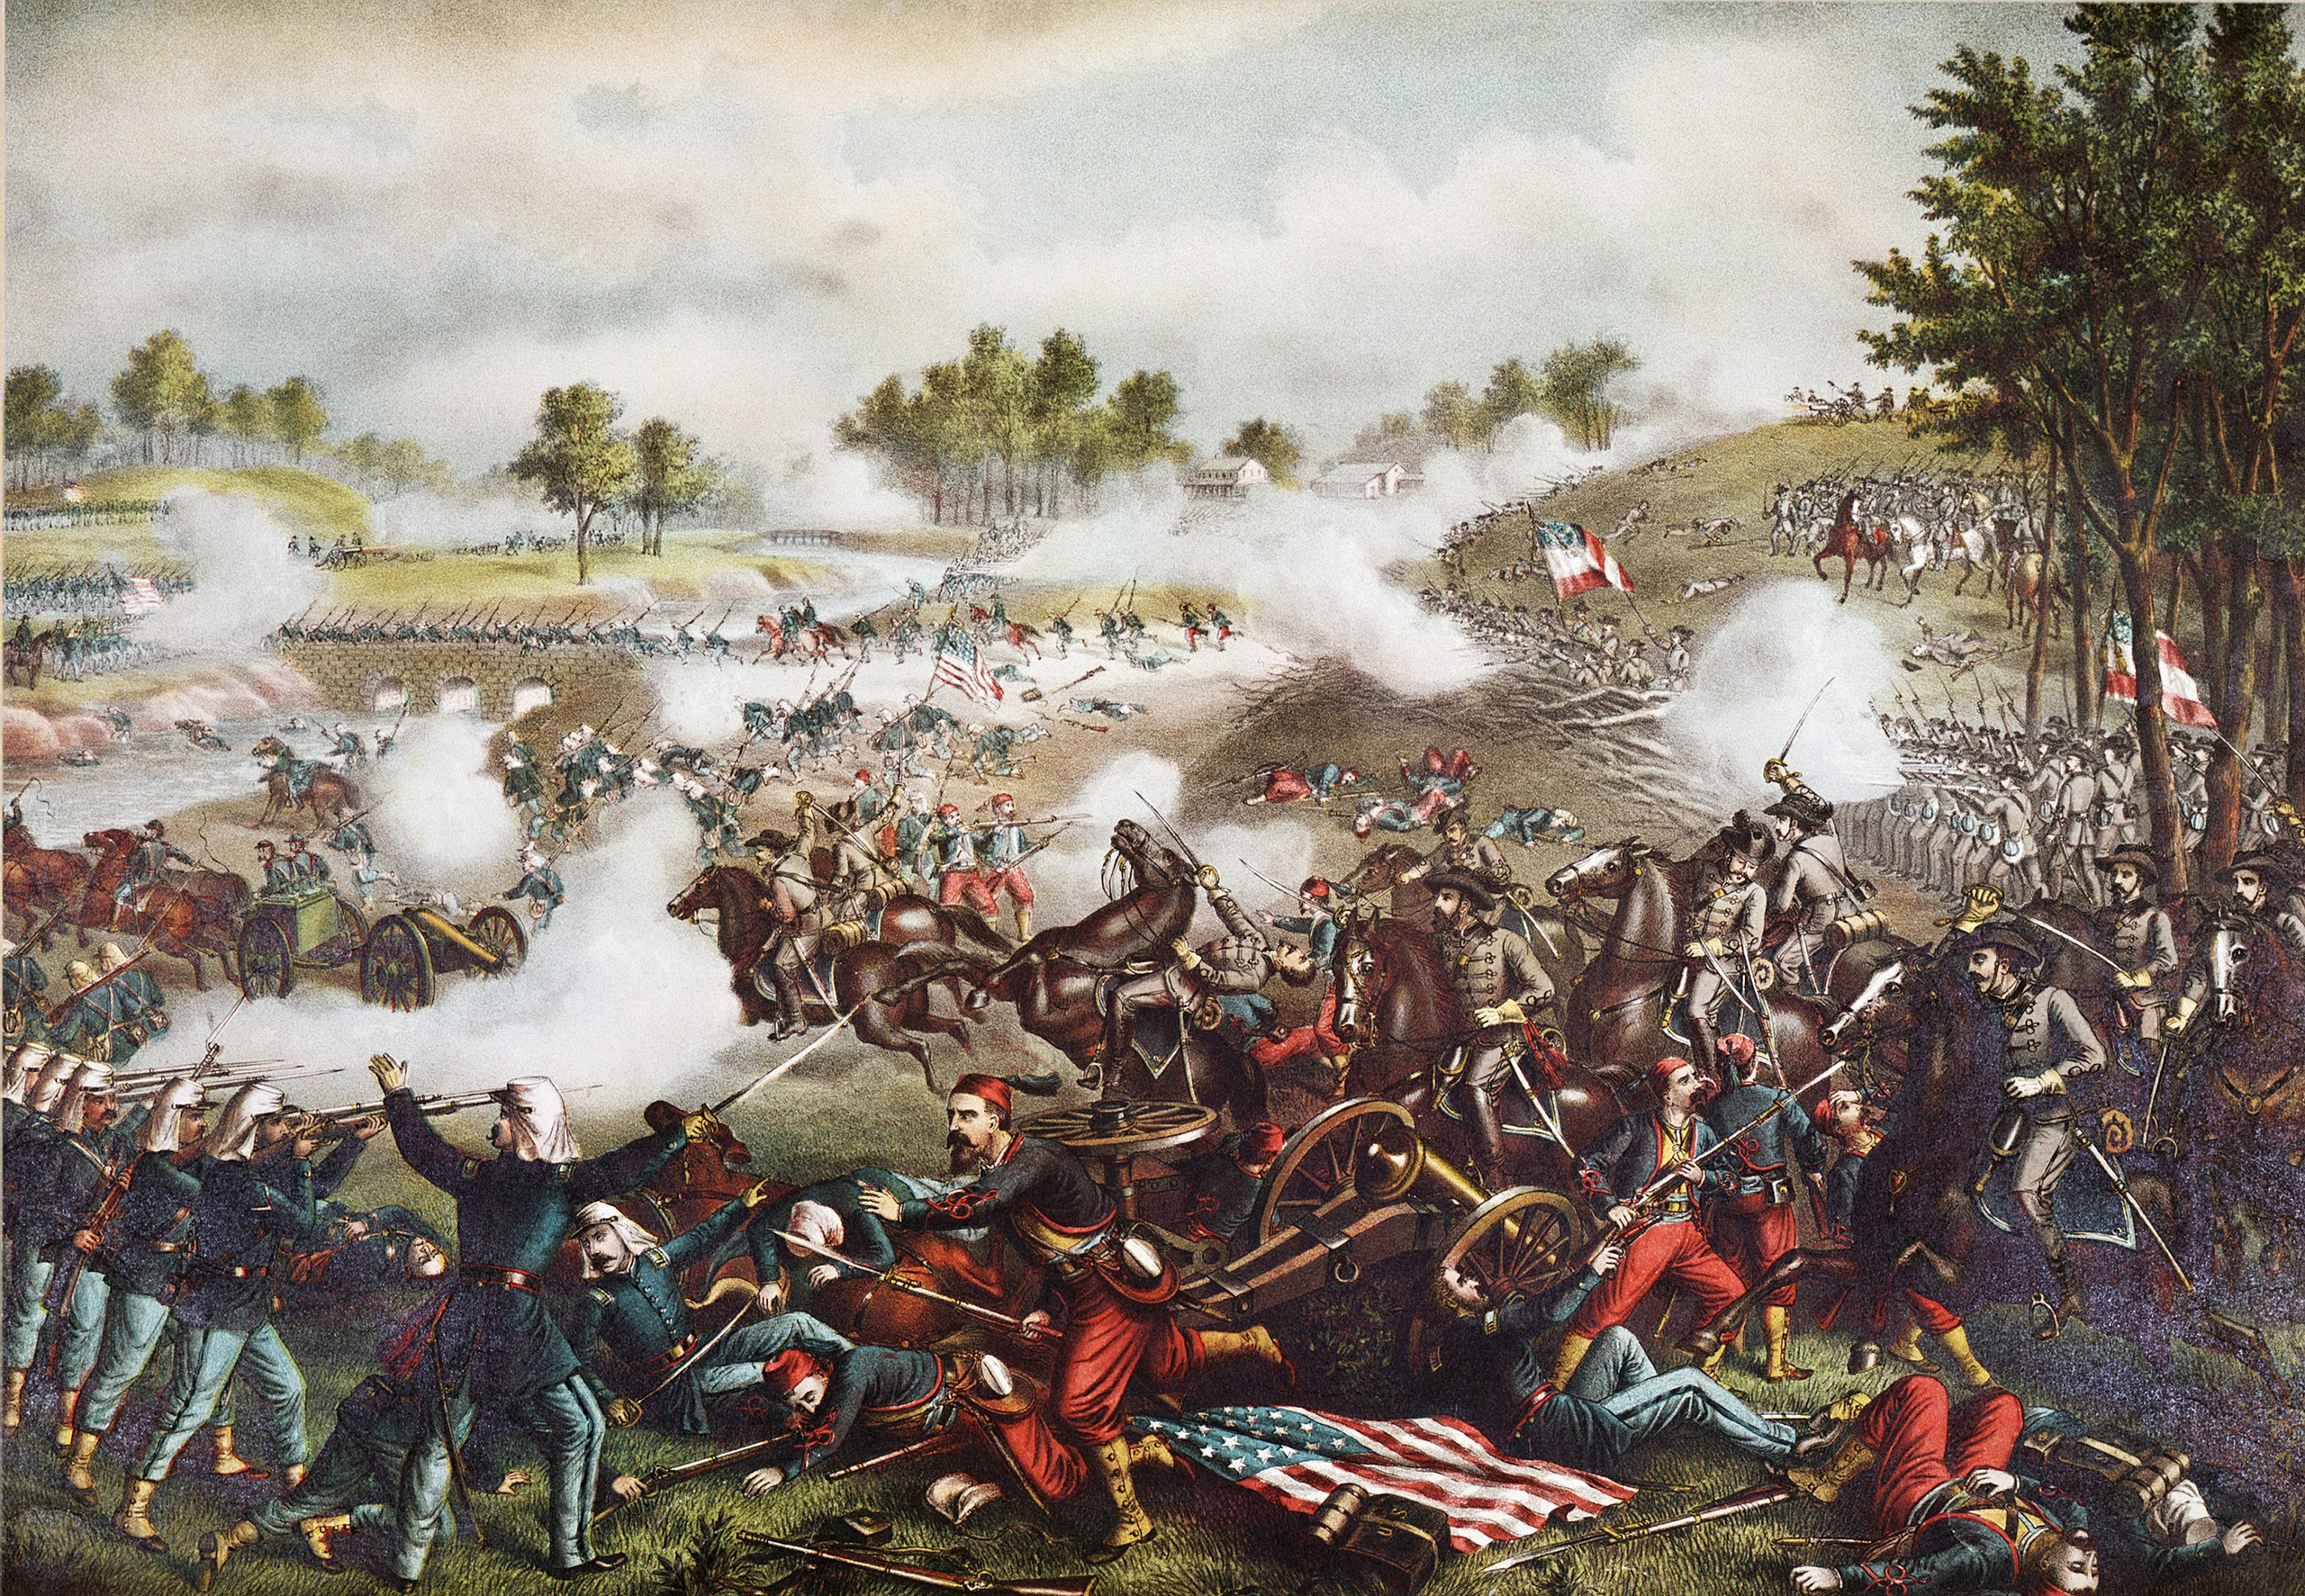 Three Moments That Might Have Brought an Early End to the U.S. Civil War